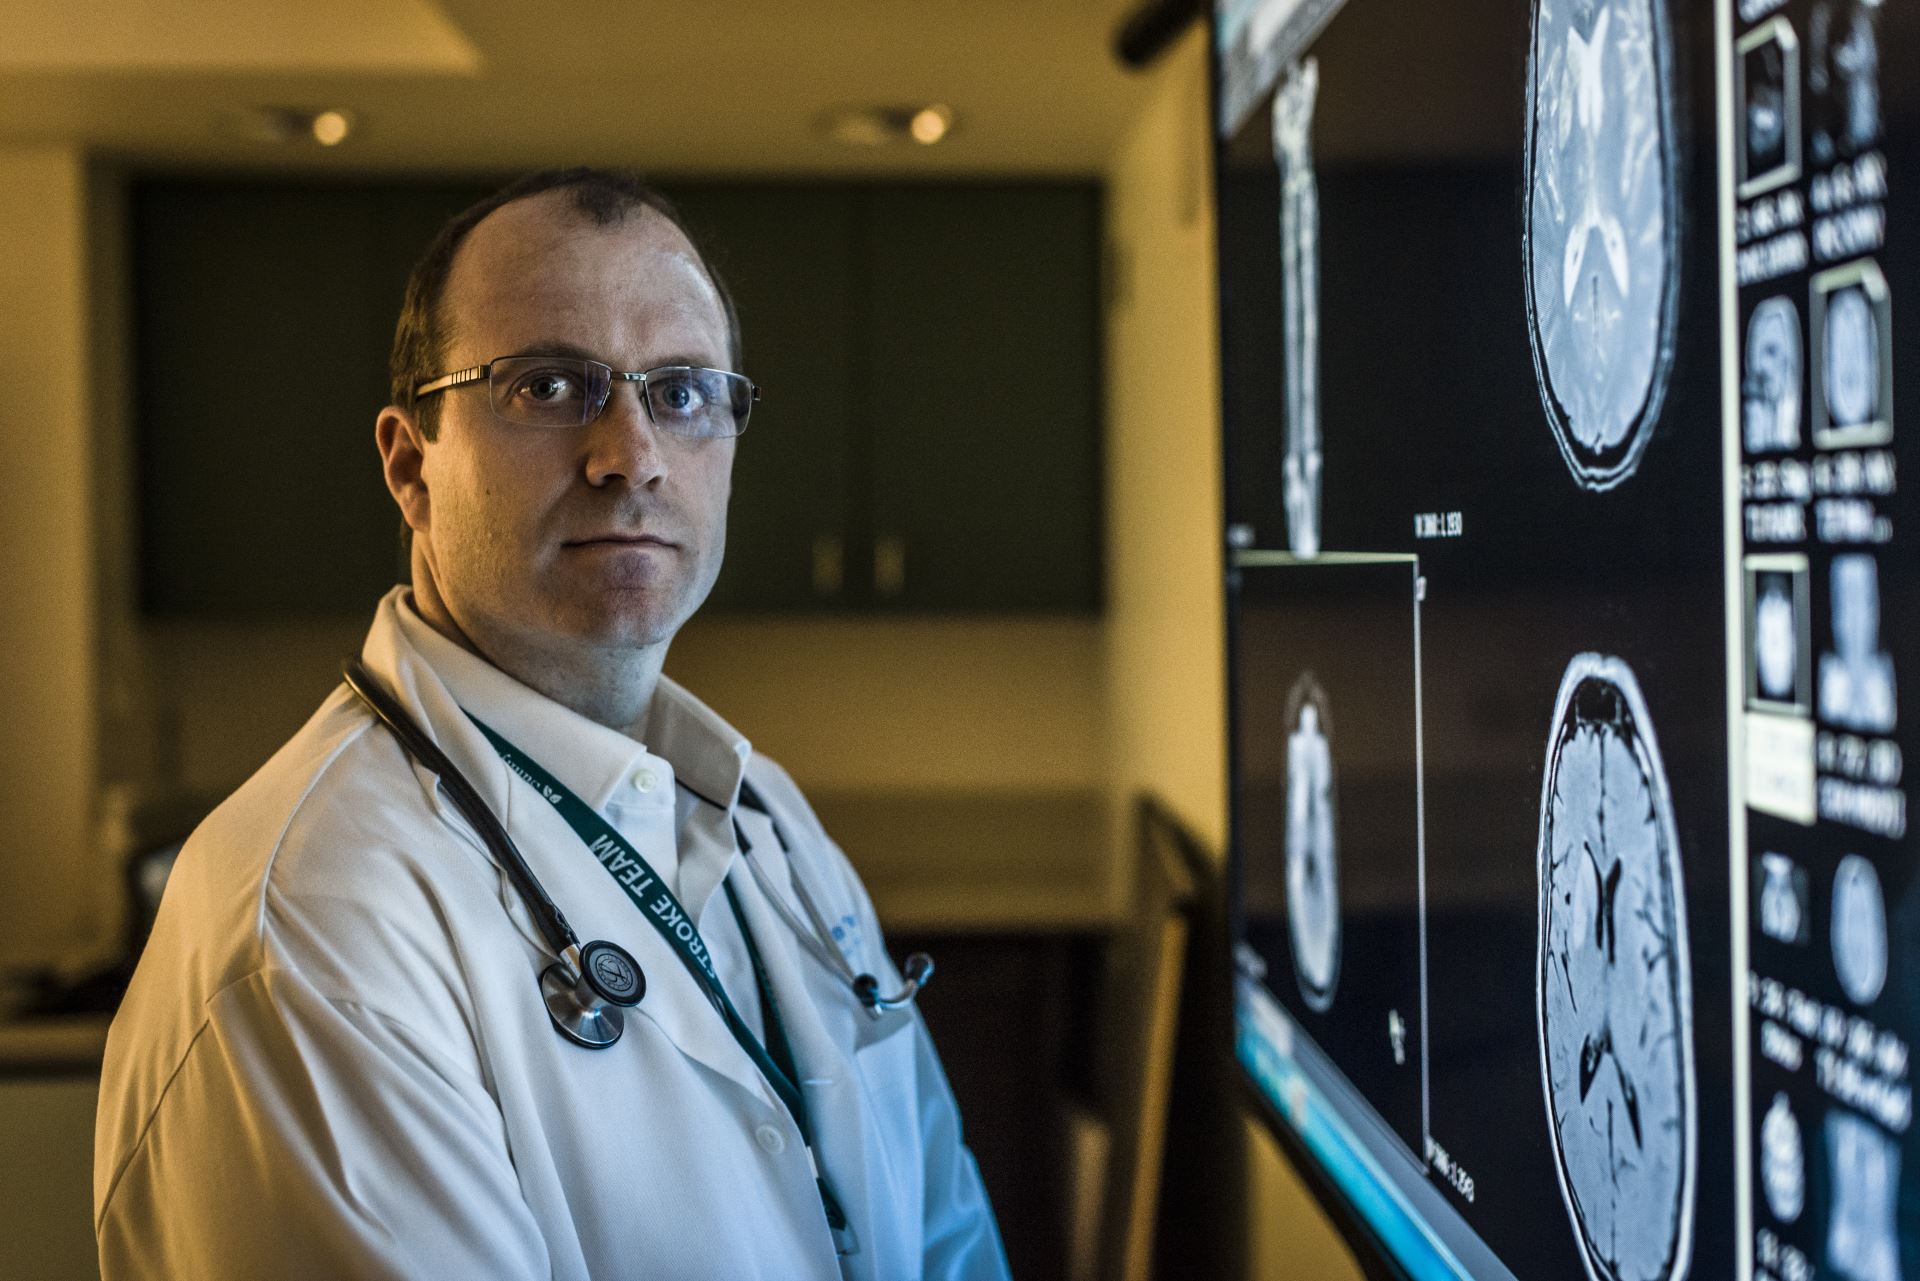 Dr. Rick Swartz appointed to the Bastable-Potts Chair in Stroke Research